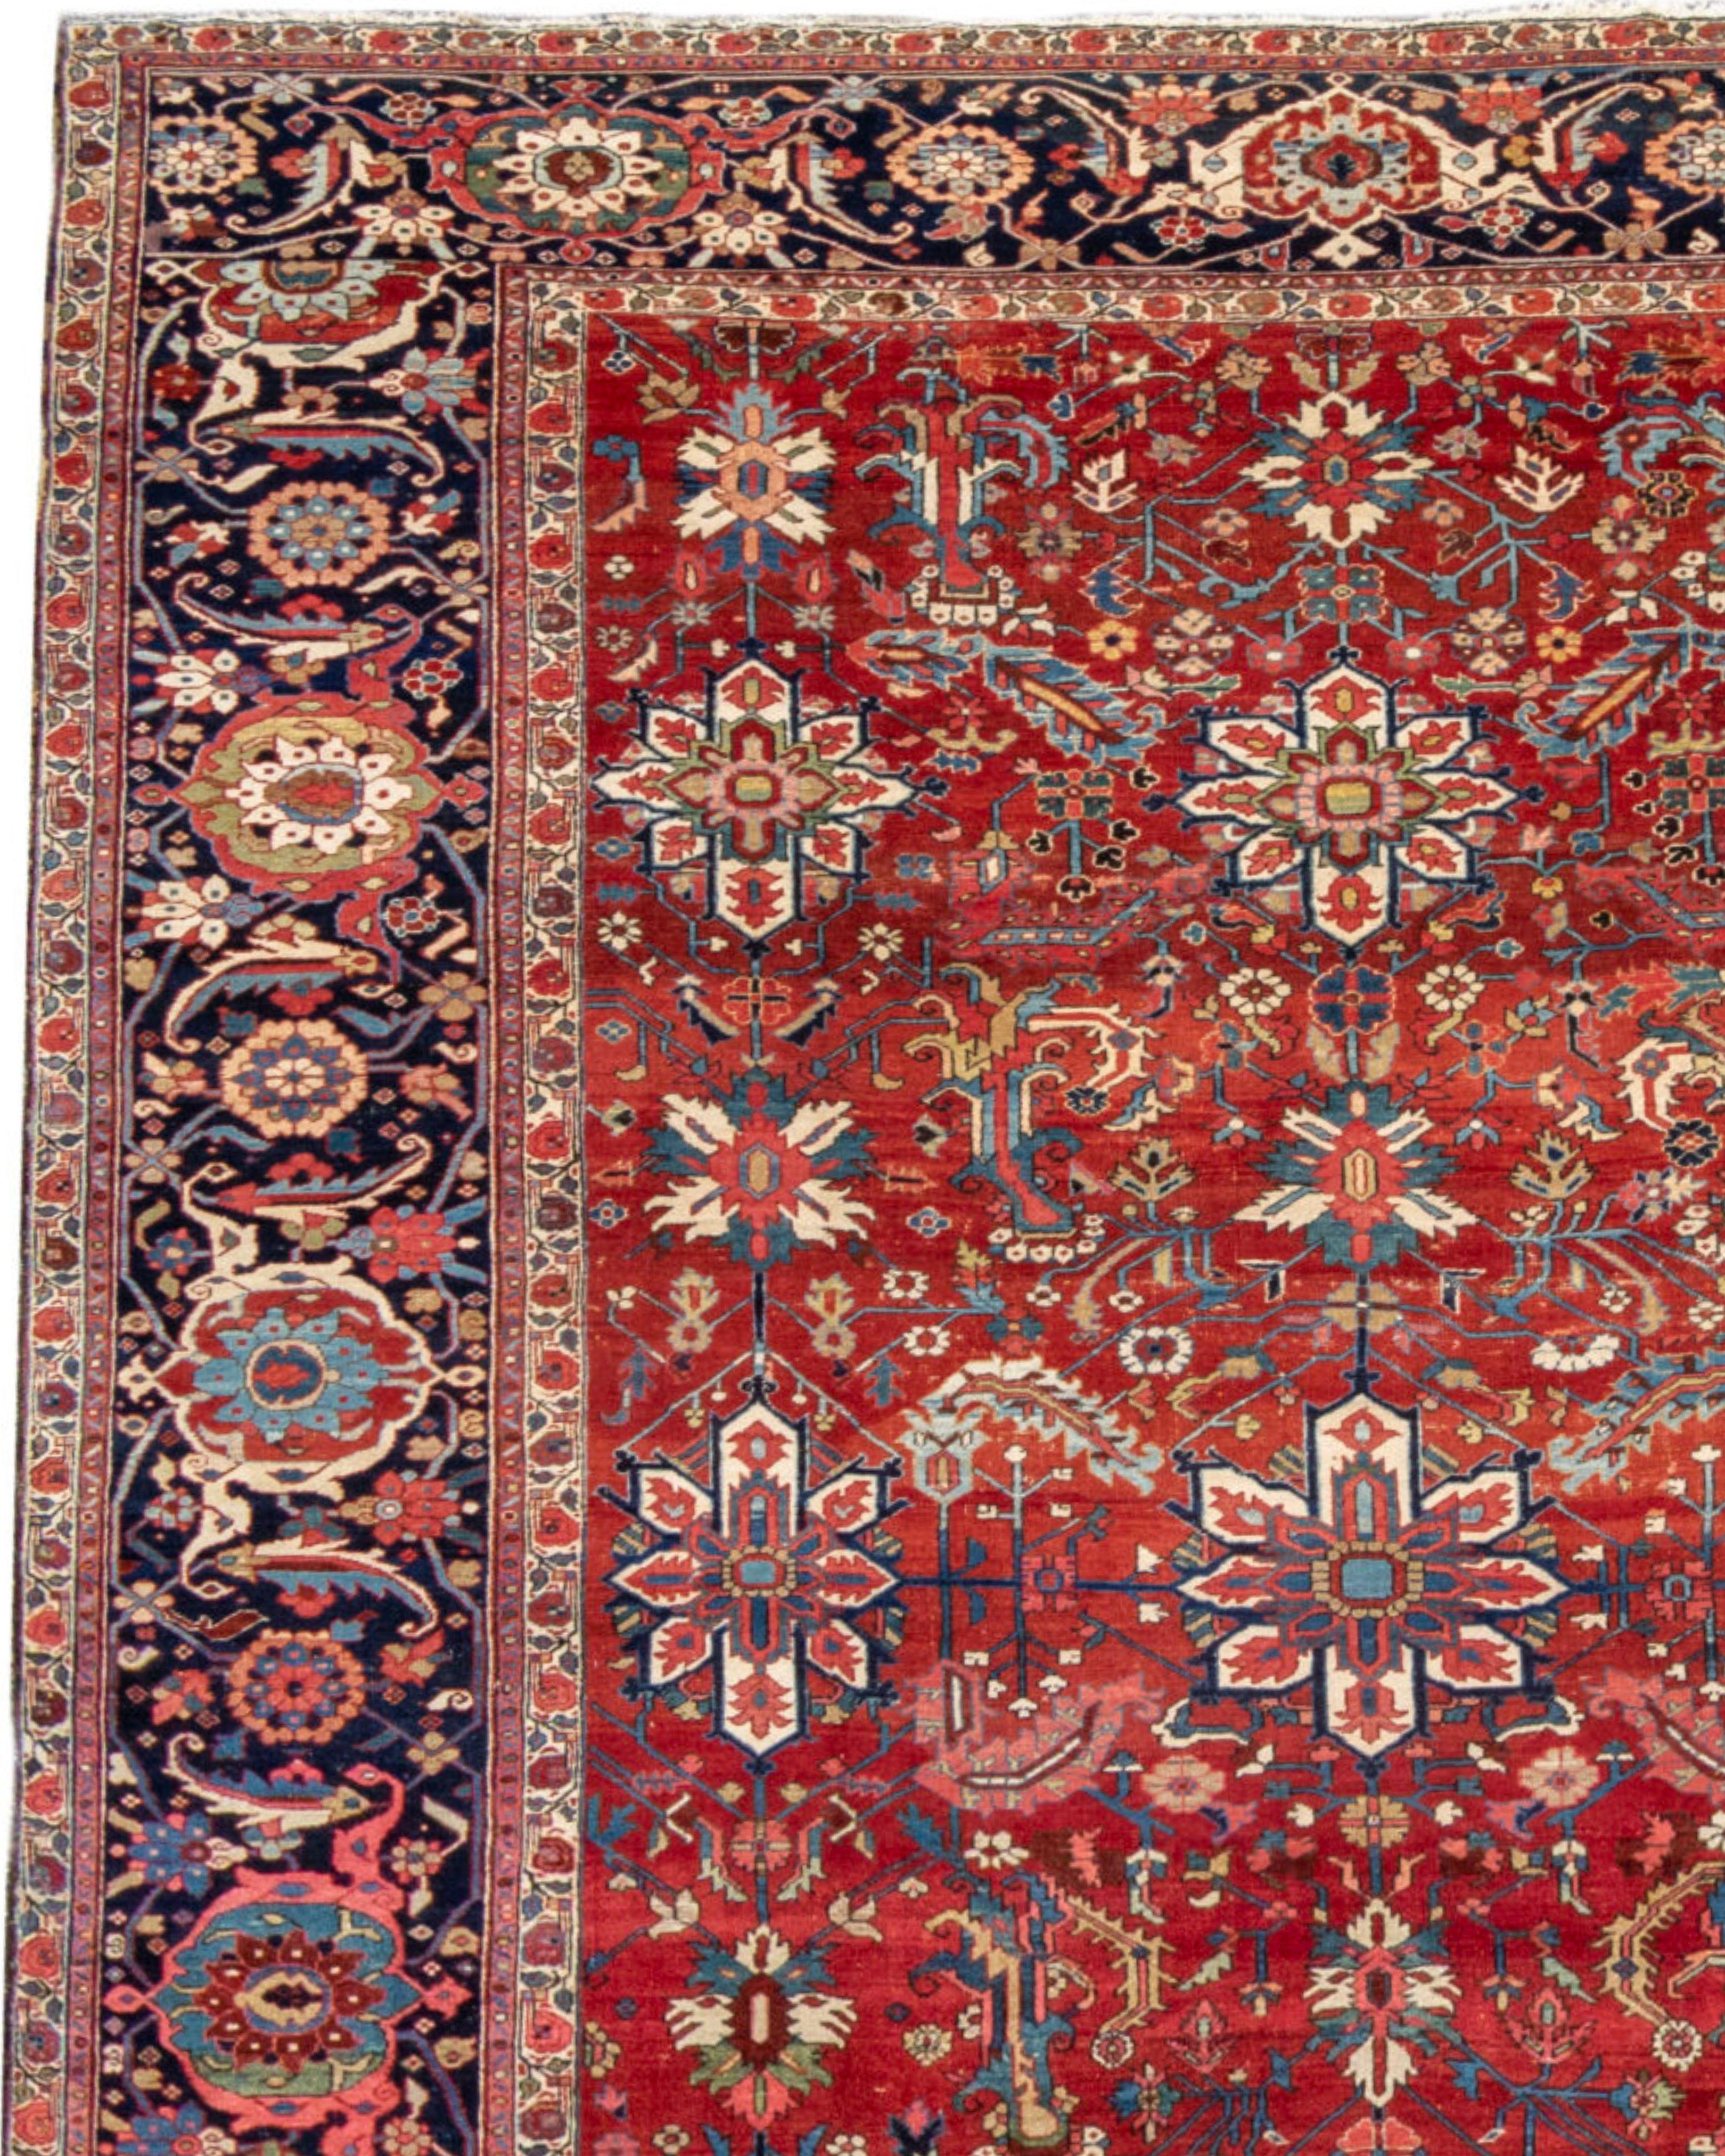 Hand-Woven Antique Large Persian Heriz Carpet, Late 19th Century For Sale